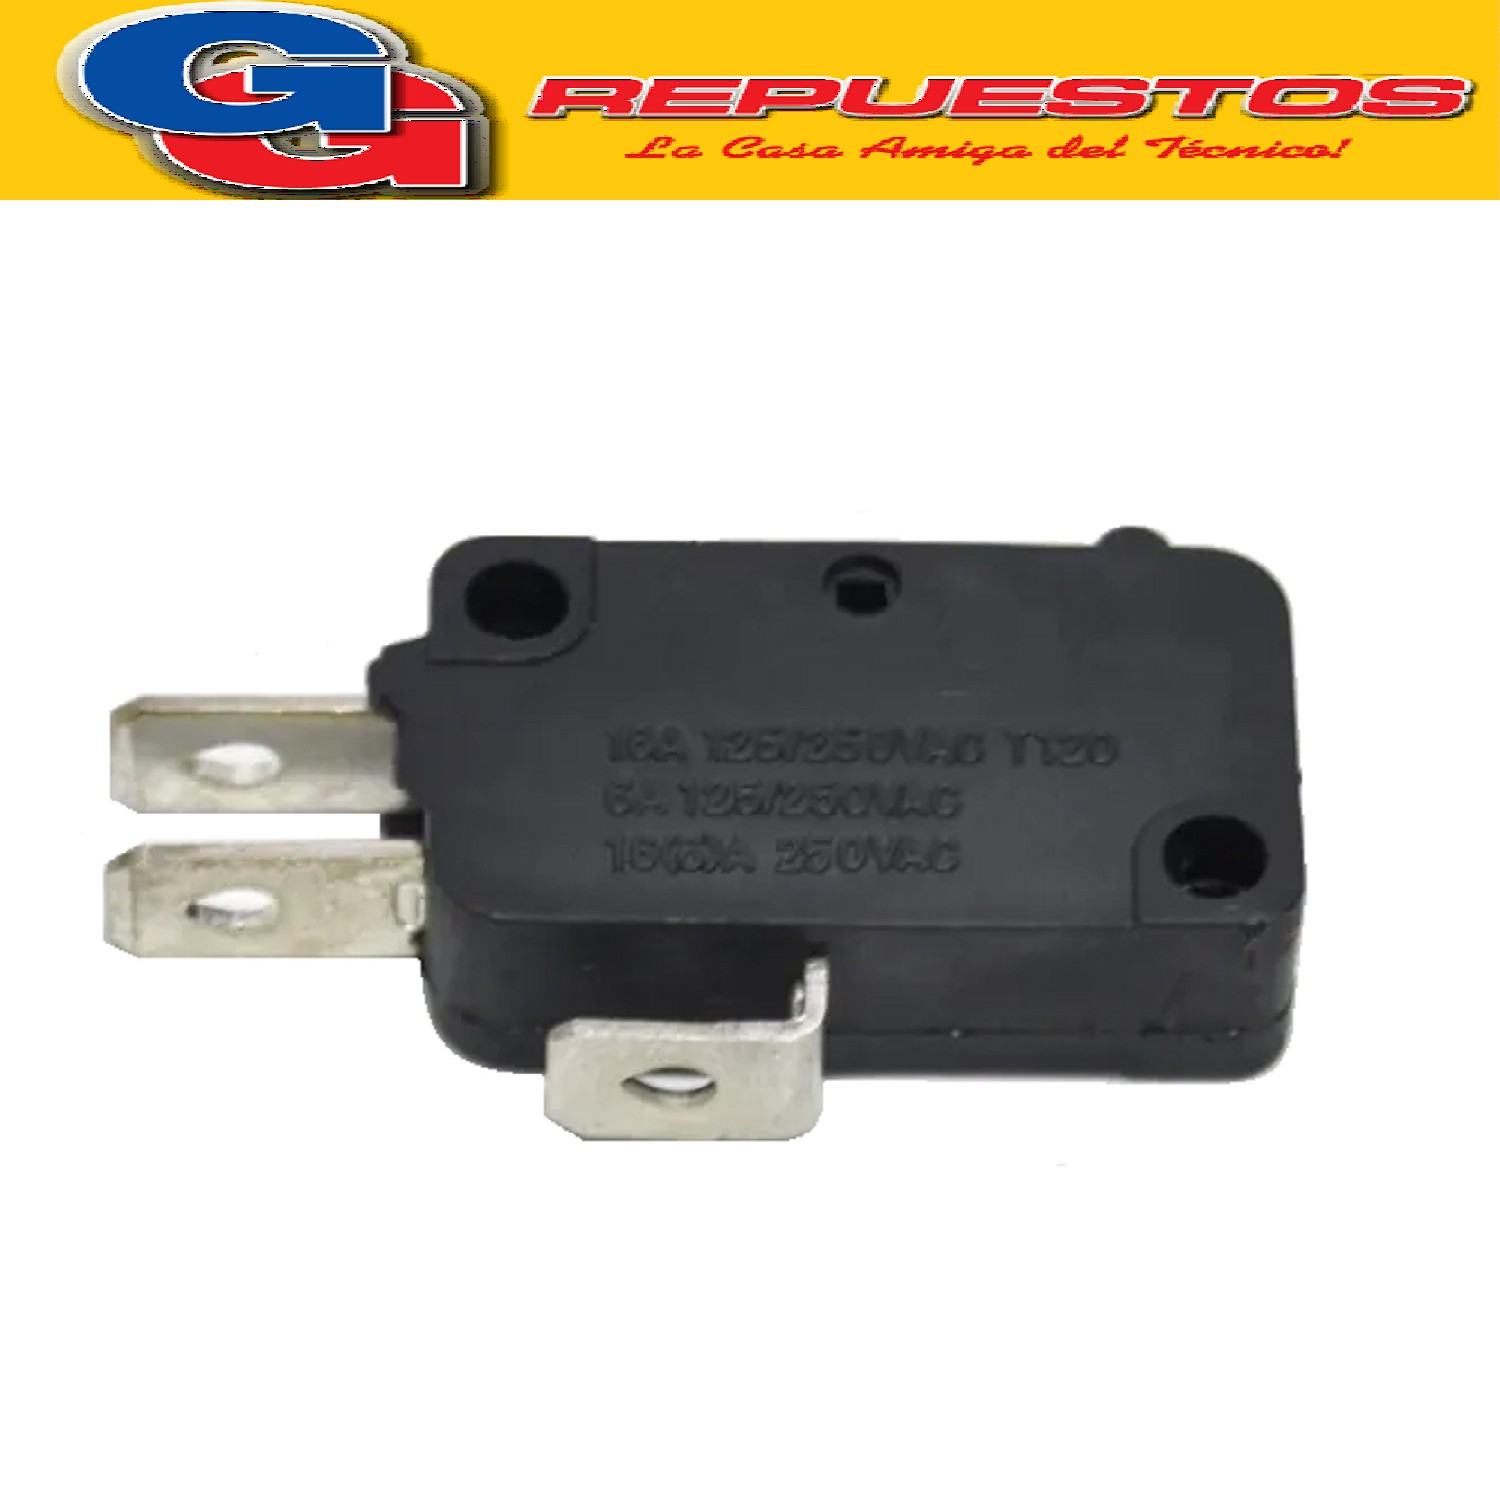 MICROSWITCH 3 CONTACTOS 16 A 250 V N/C Y N/A PATAS ANCHAS 16 A 125/250VAC T120 6A 125/250VAC 